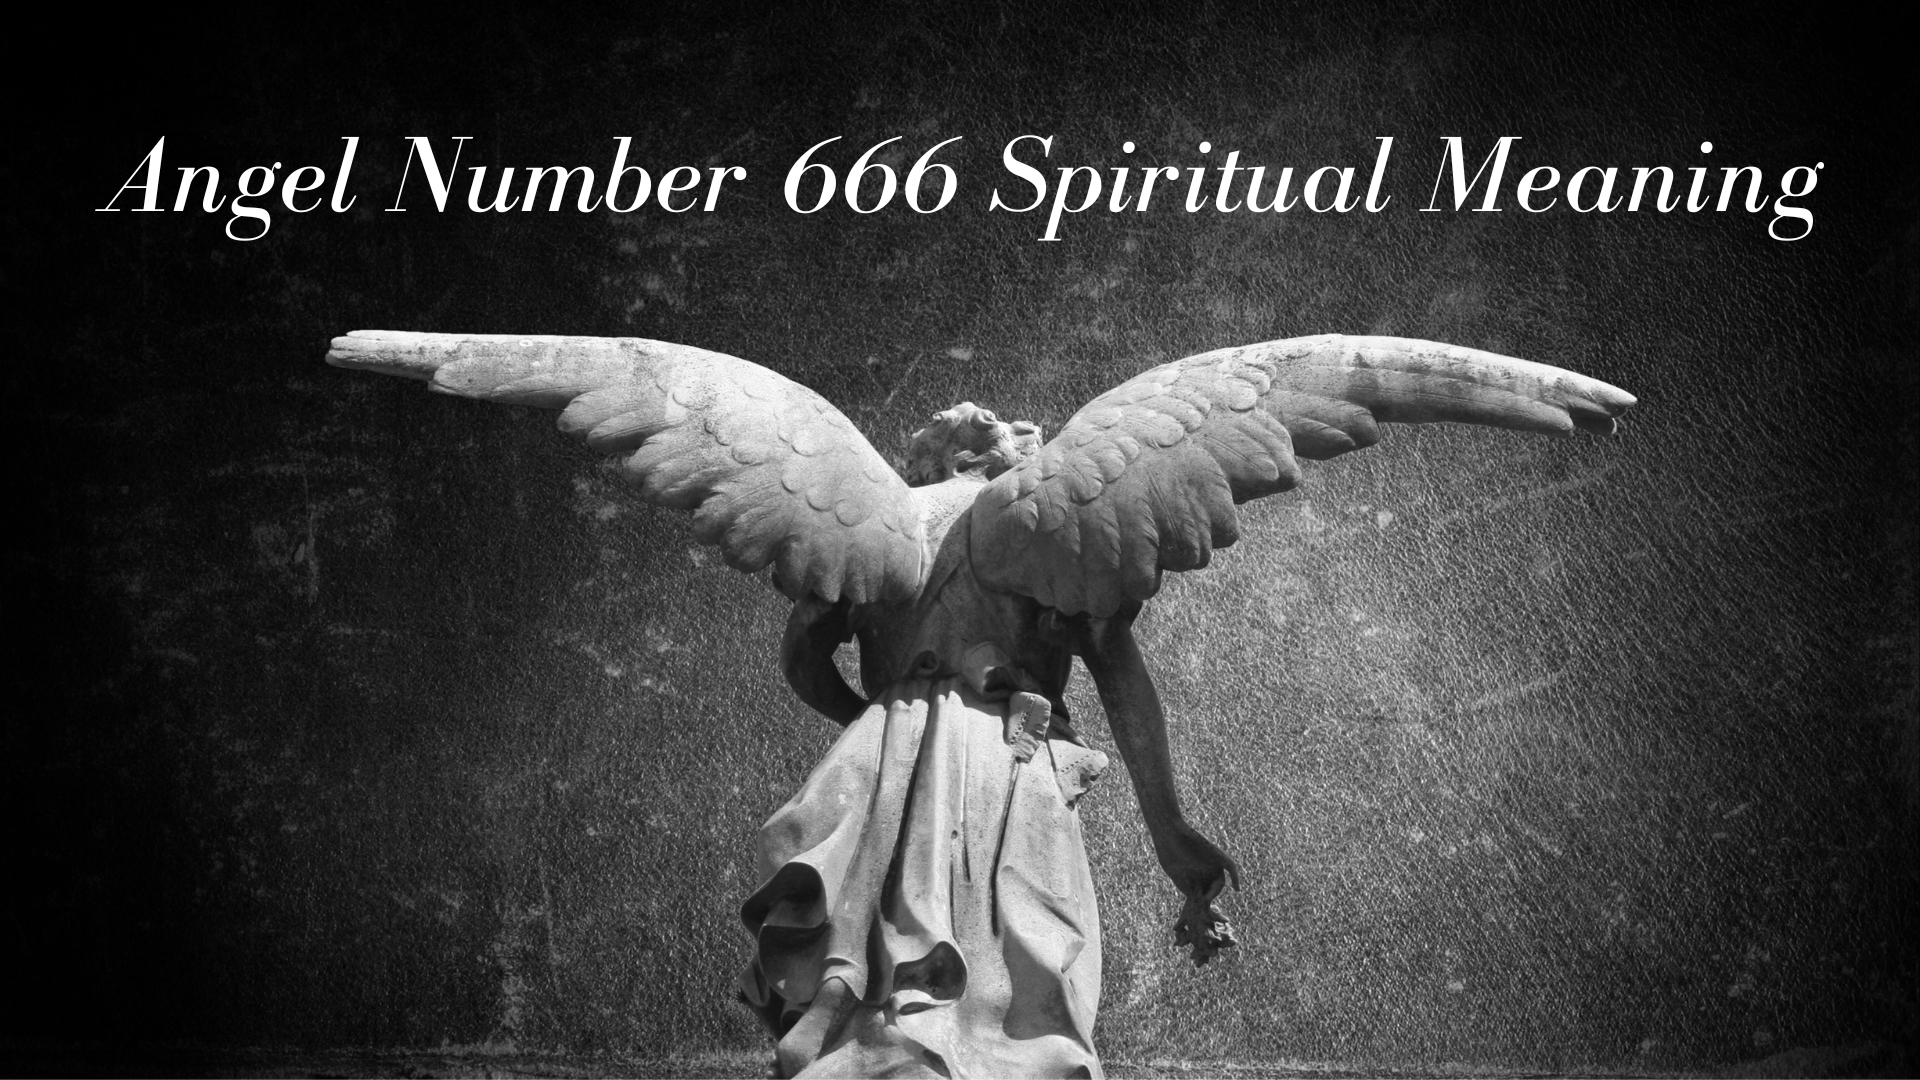 An angel kneeling and facing on the opposite side with words Angel Number 666 Spiritual Meaning